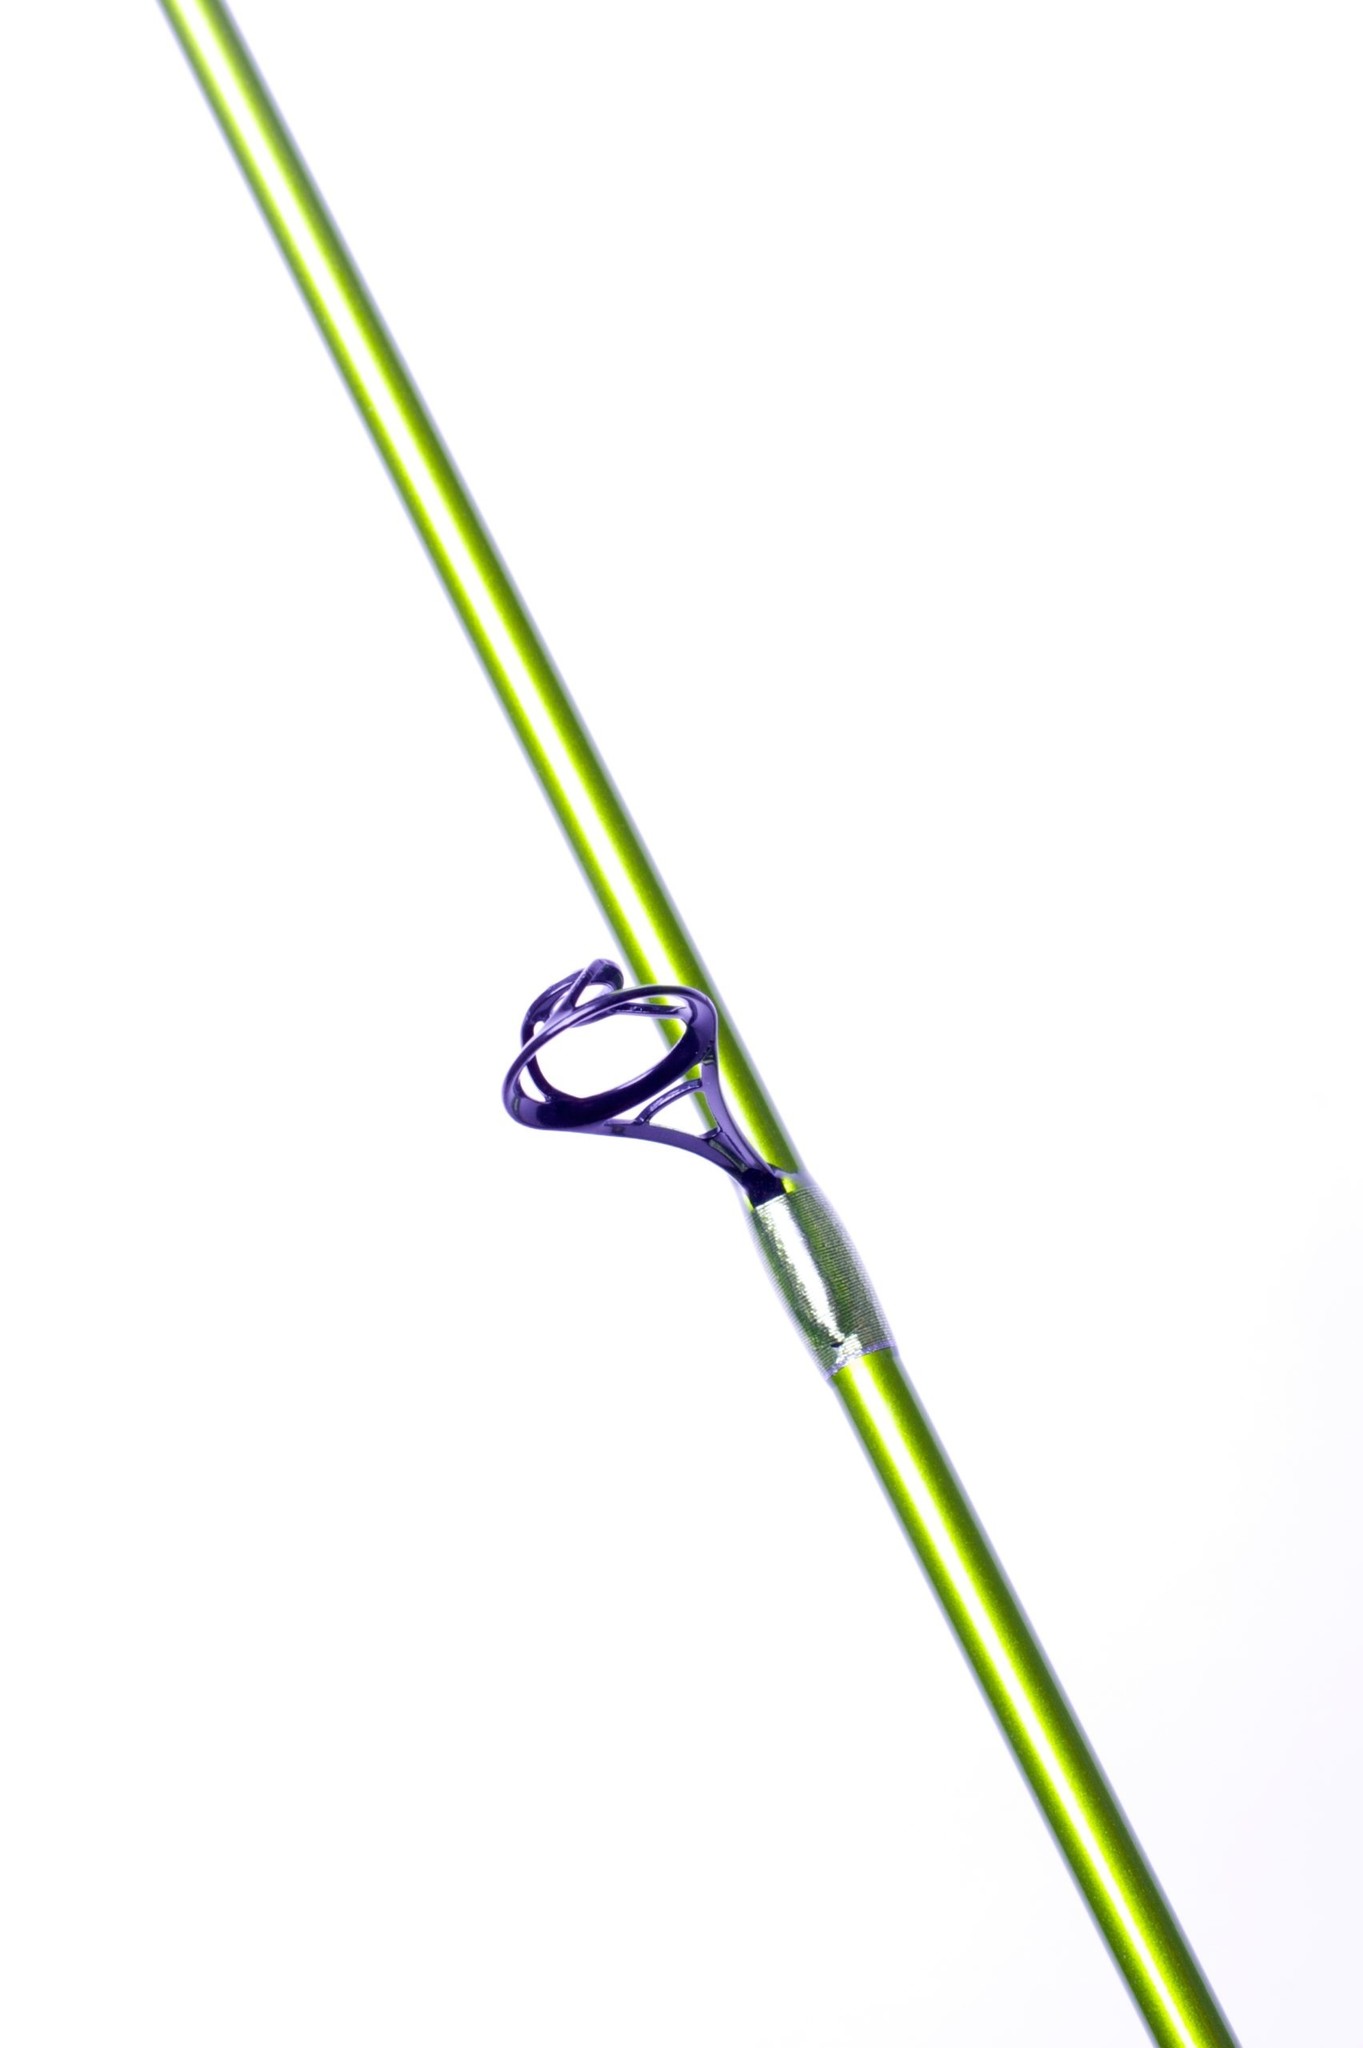 SUPER GRIPS 8' MID SEAT SPINNING ROD - Gellco Outdoors